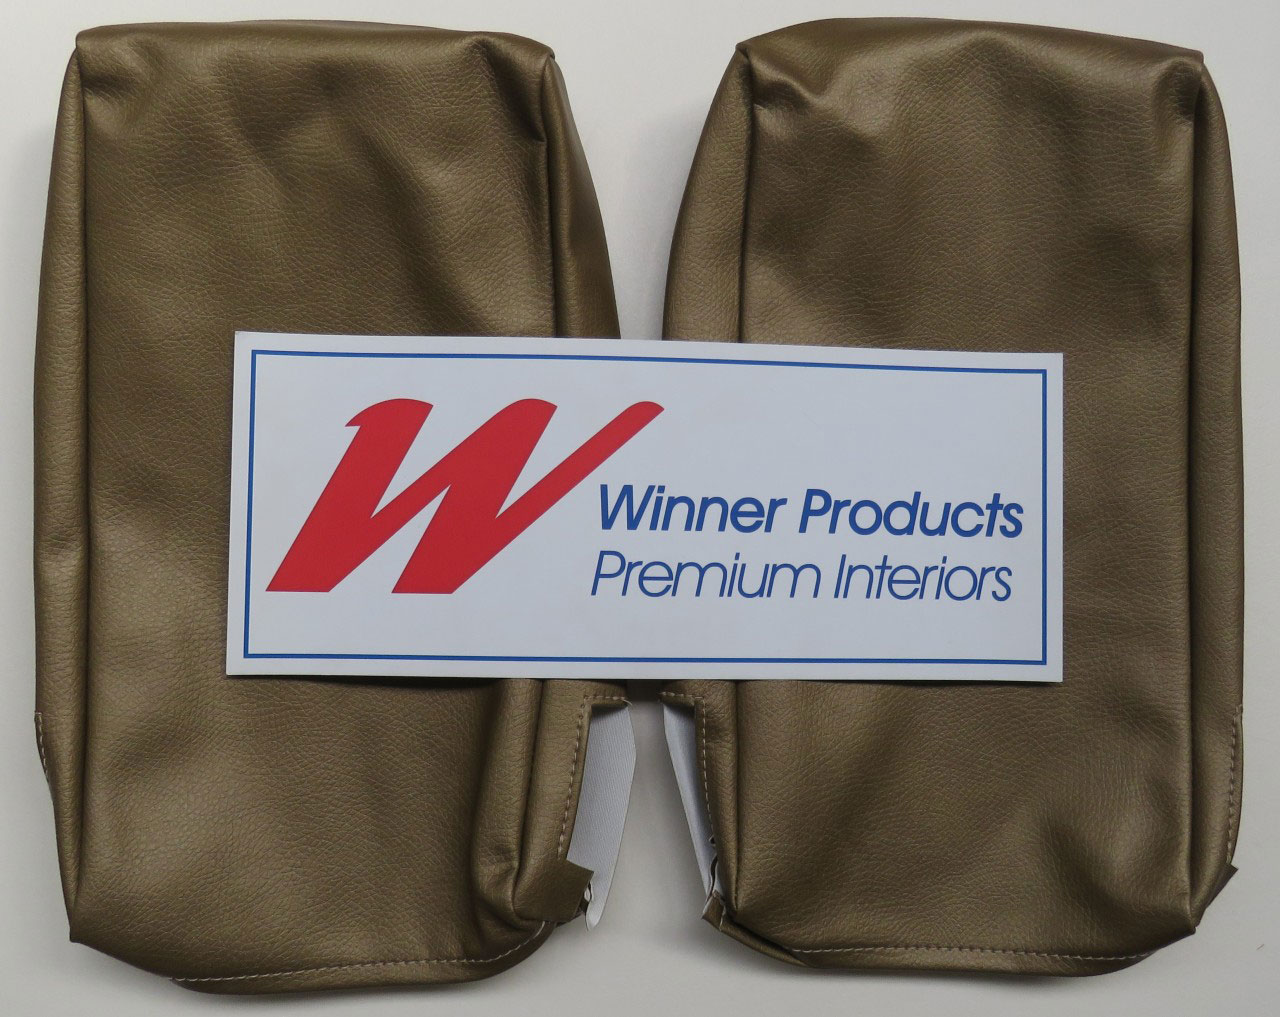 Holden Premier HG Premier Wagon 11R Antique Gold Seat Covers (Image 8 of 10)